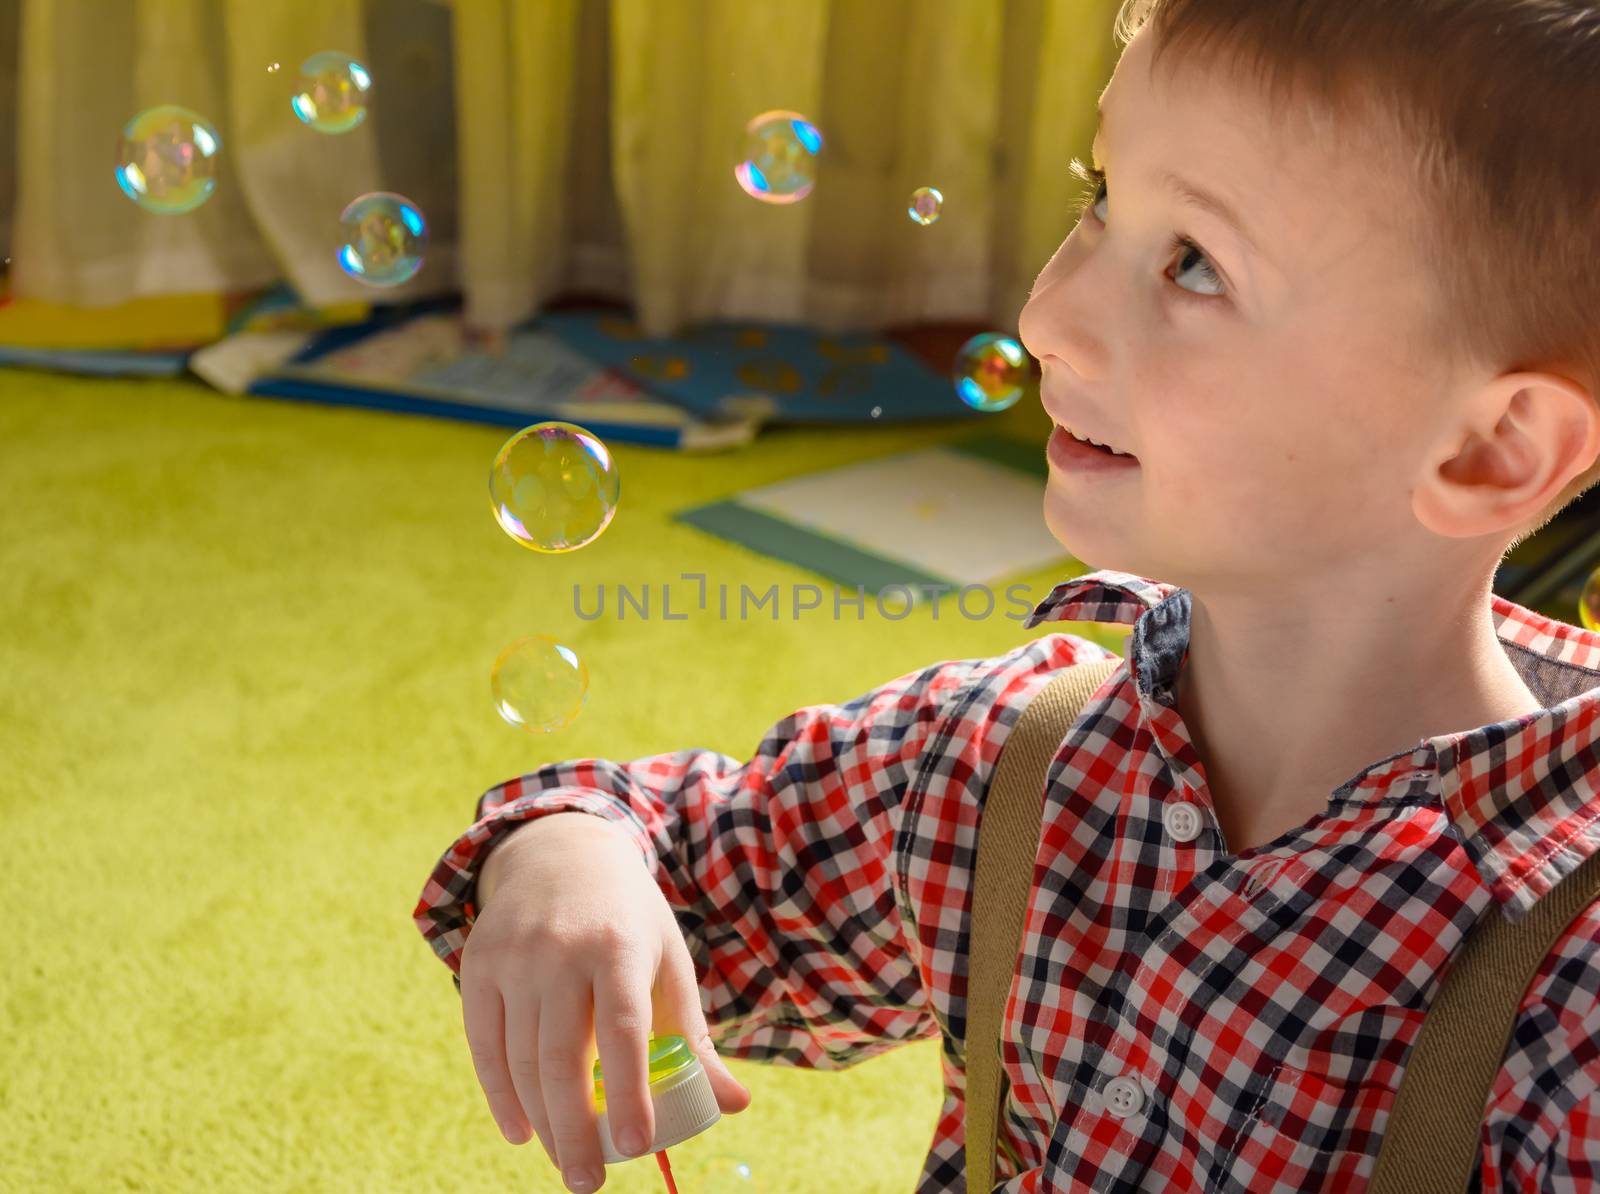 a child inflates soap bubbles and smiling